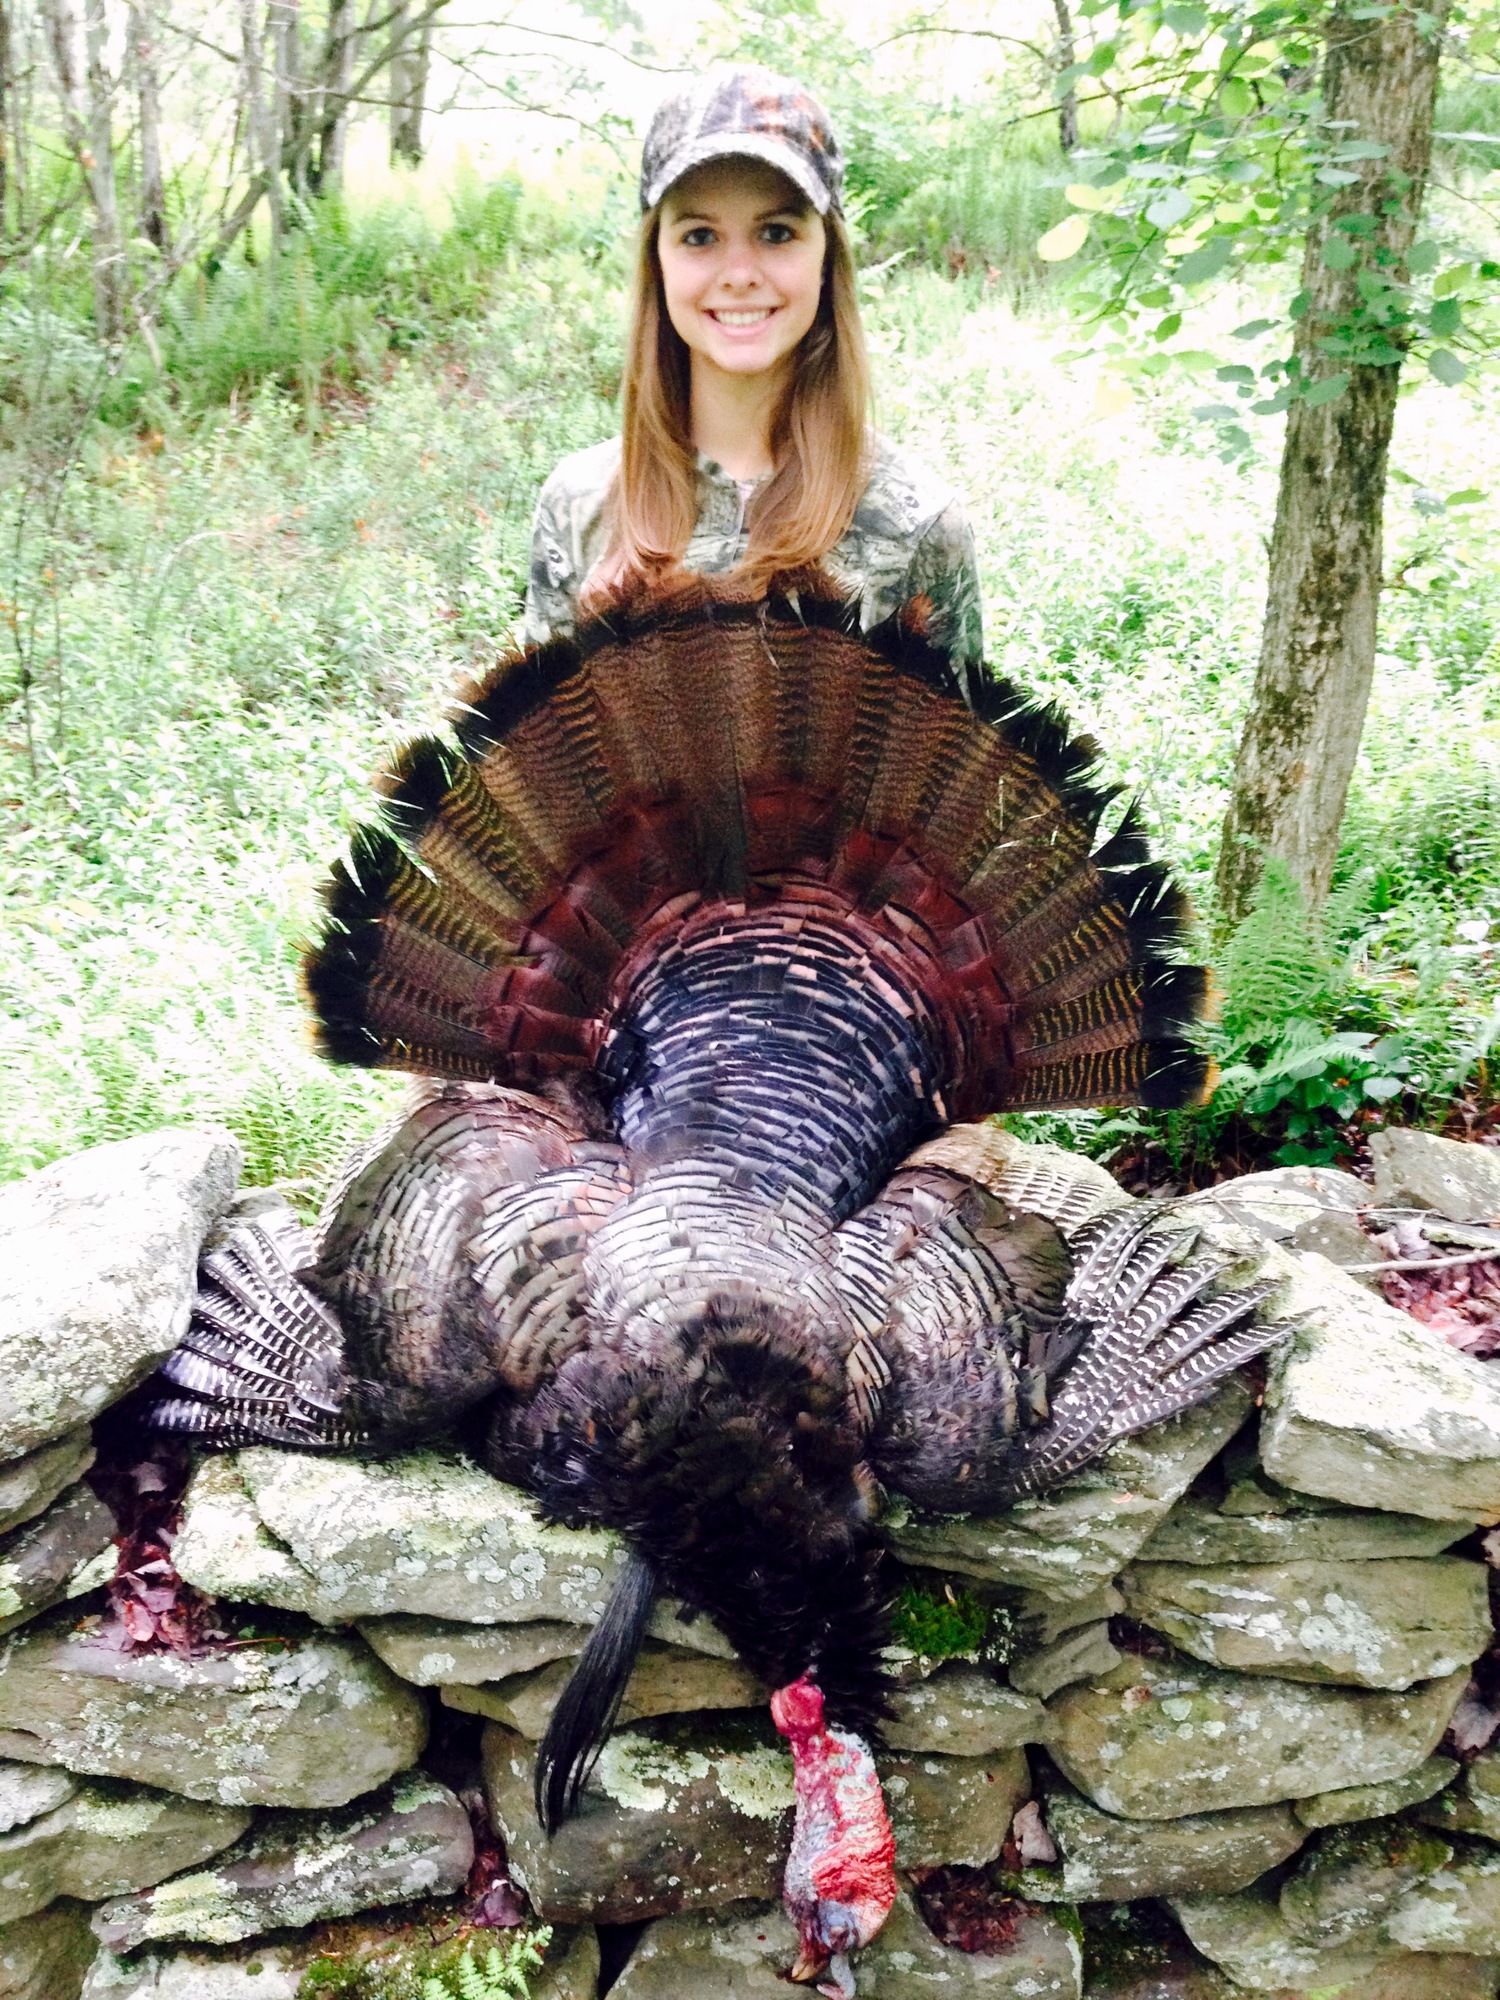 A young woman displaying the turkey she took.